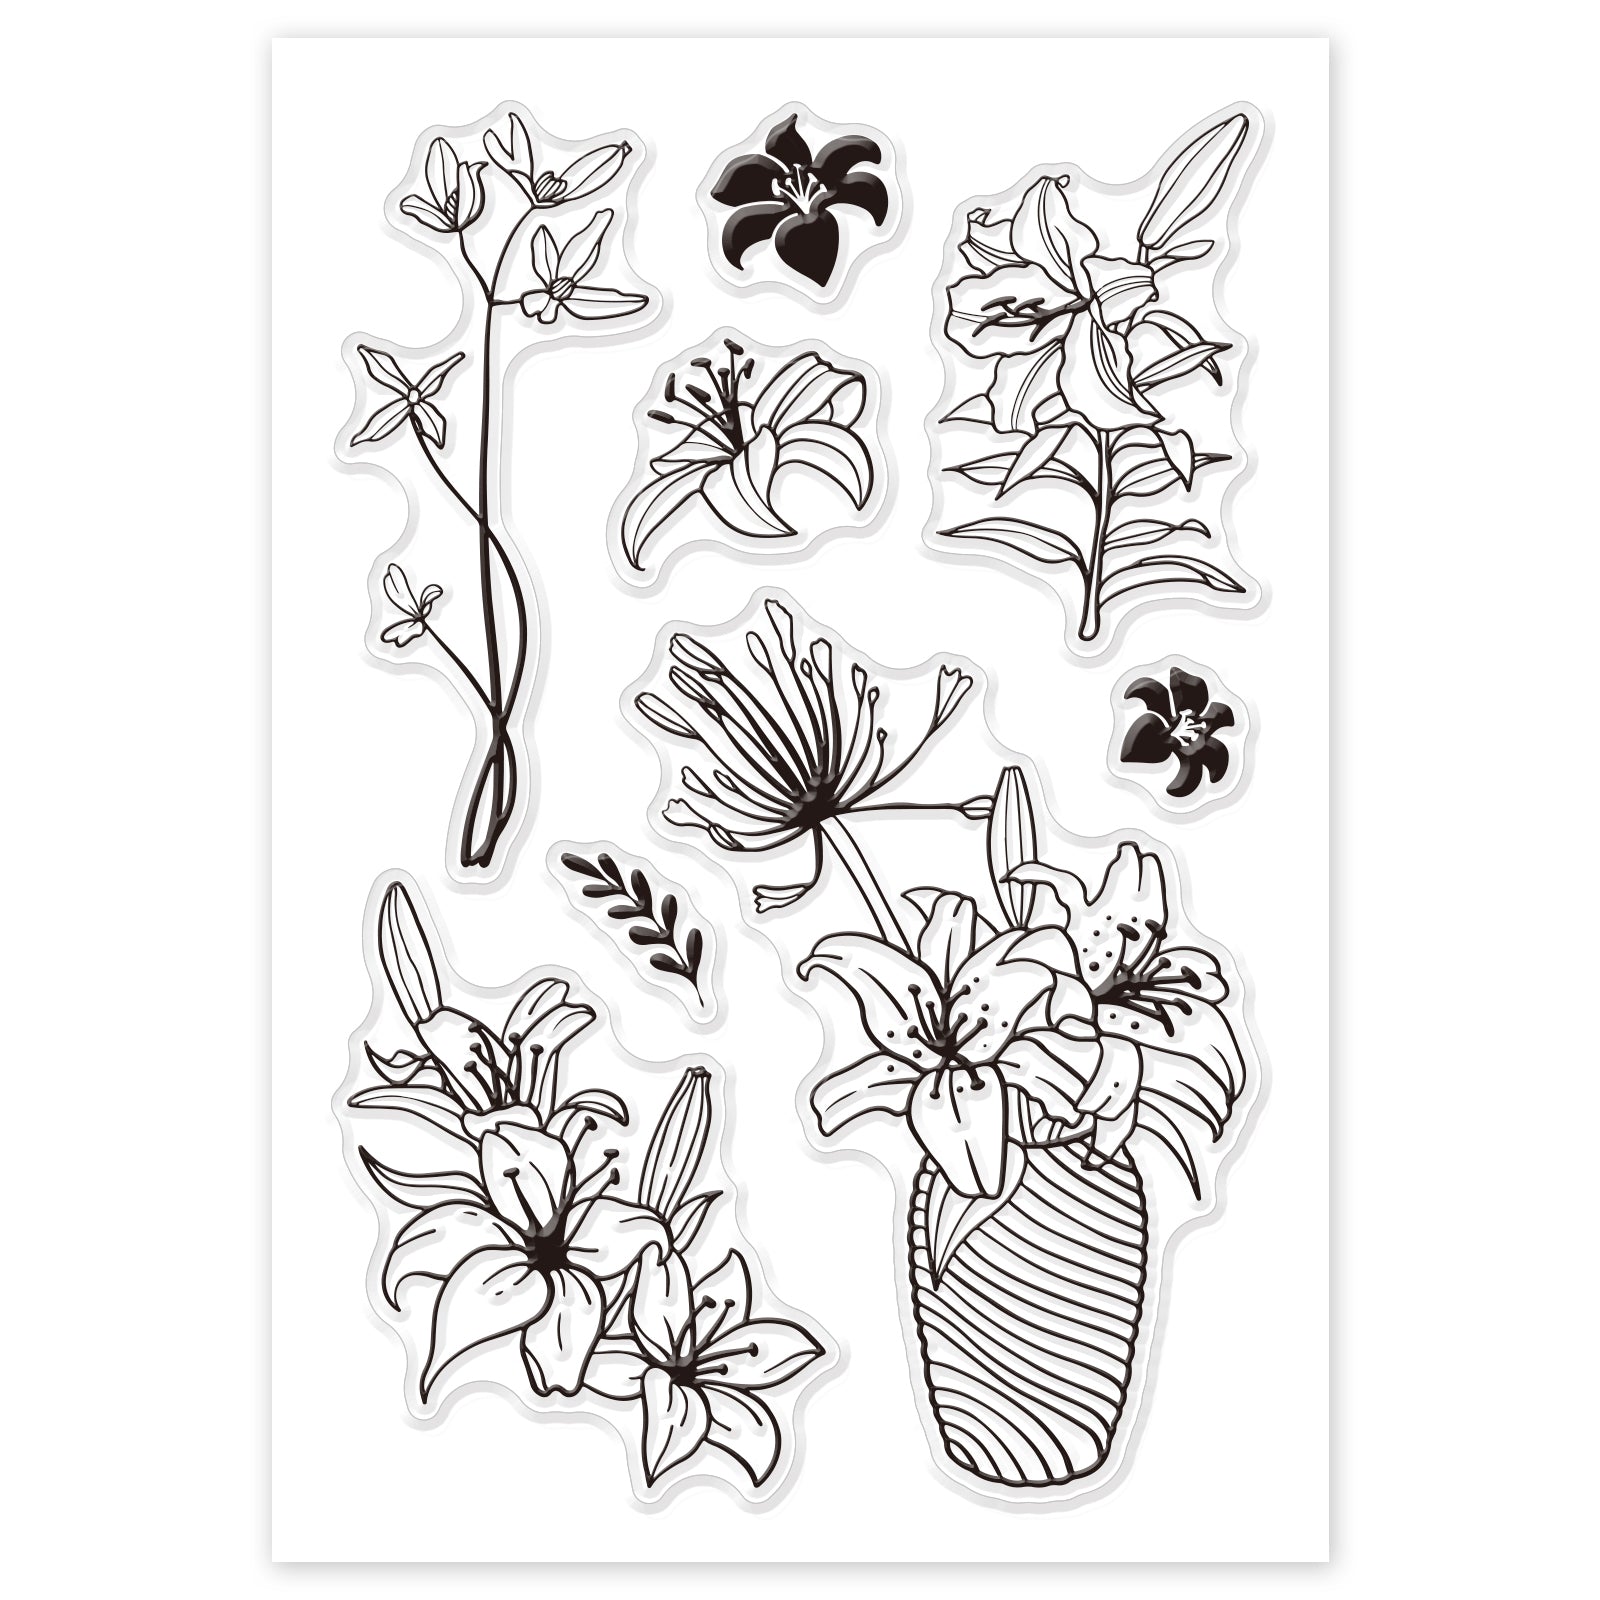 GLOBLELAND Lily Flower Clear Stamps Silicone Stamp Cards Plant Vase Of Lilies Clear Stamps for Card Making Decoration and DIY Scrapbooking